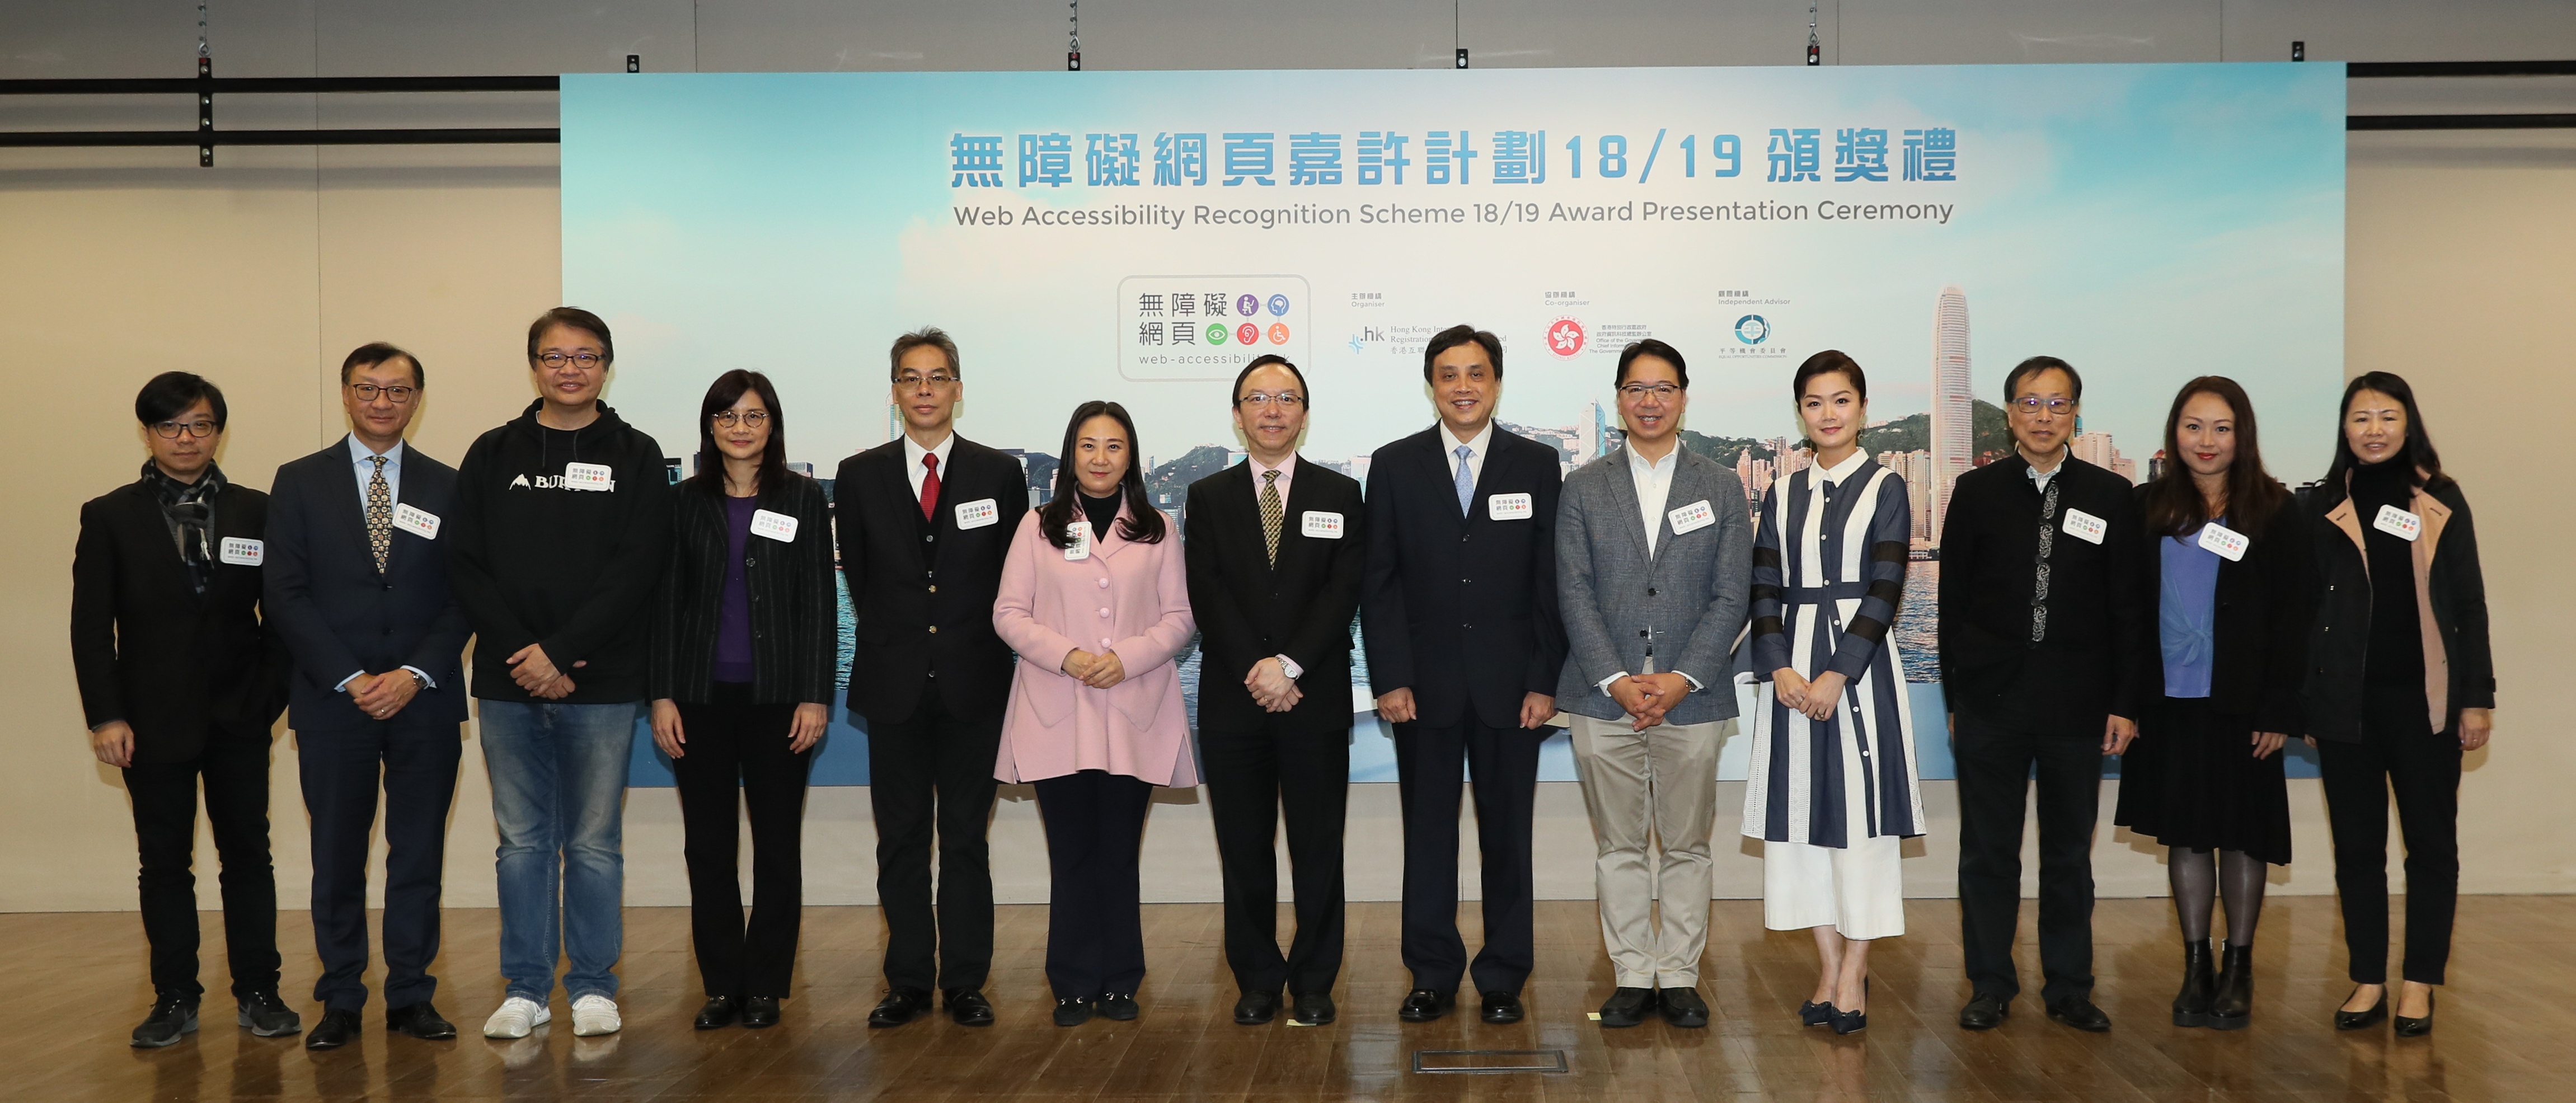 Guests posed for a group photo at the award ceremony of Web Accessibility Recognition Scheme